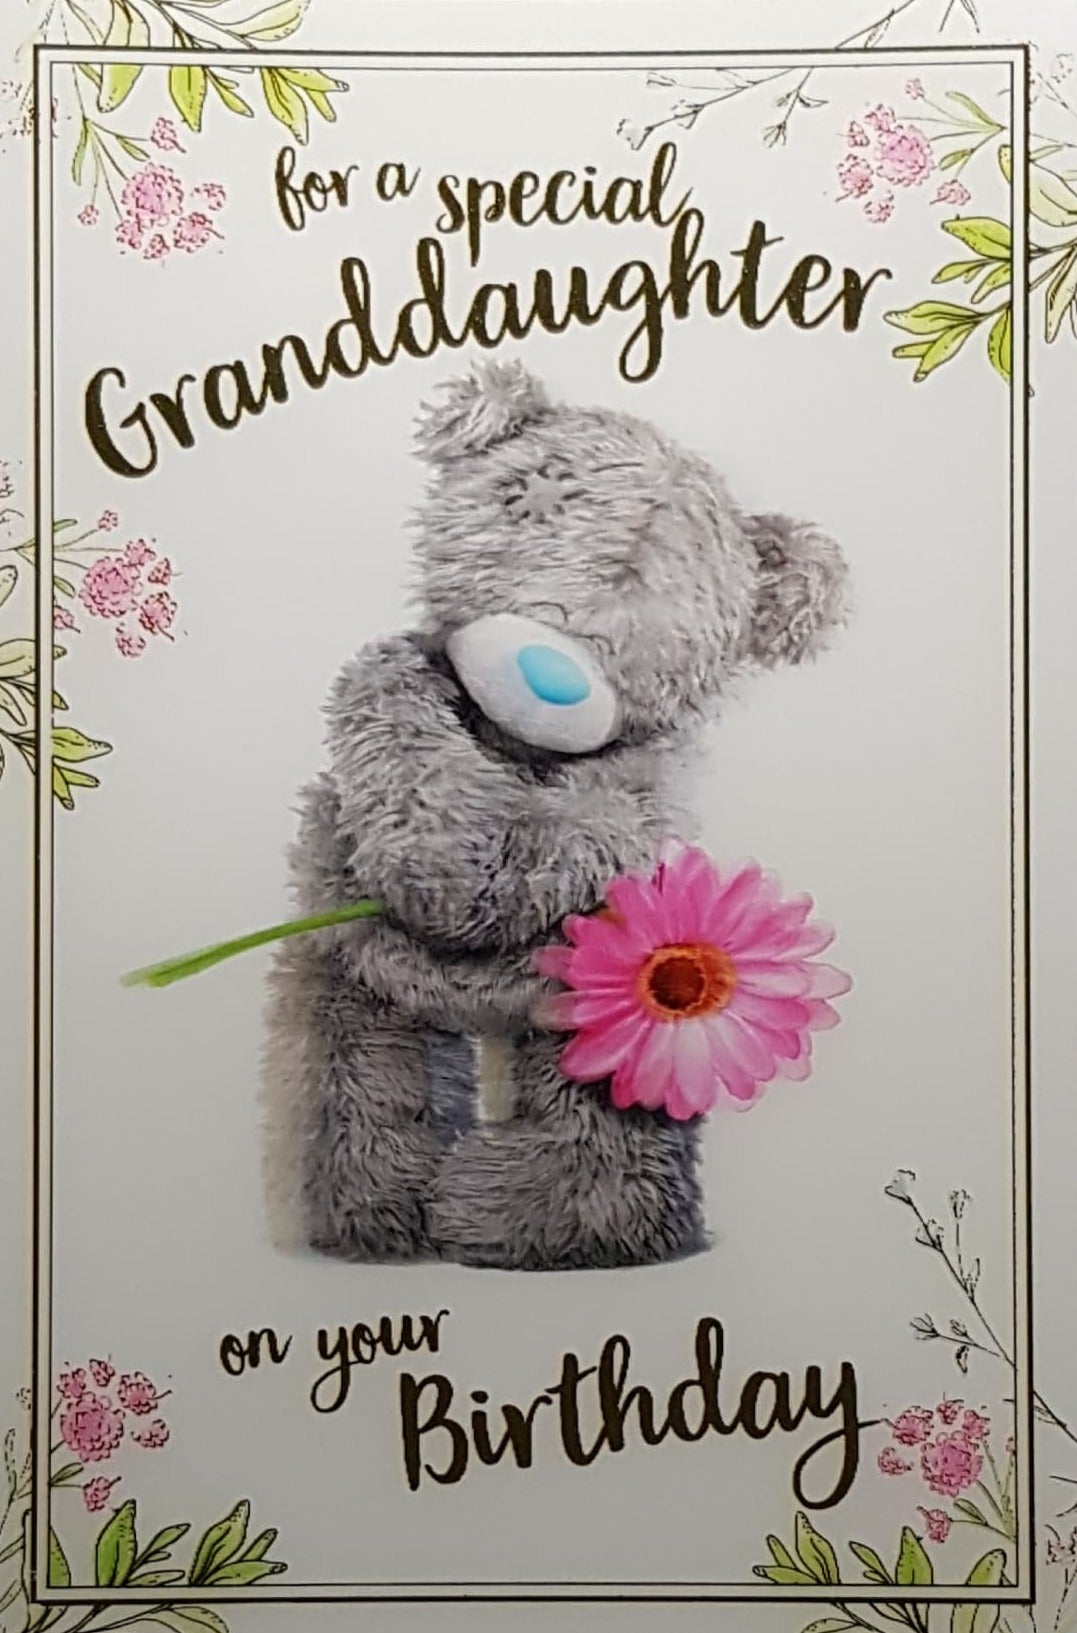 Birthday Card - Granddaughter / Cute Teddy Holding A Large Pink Flower (3D Card)